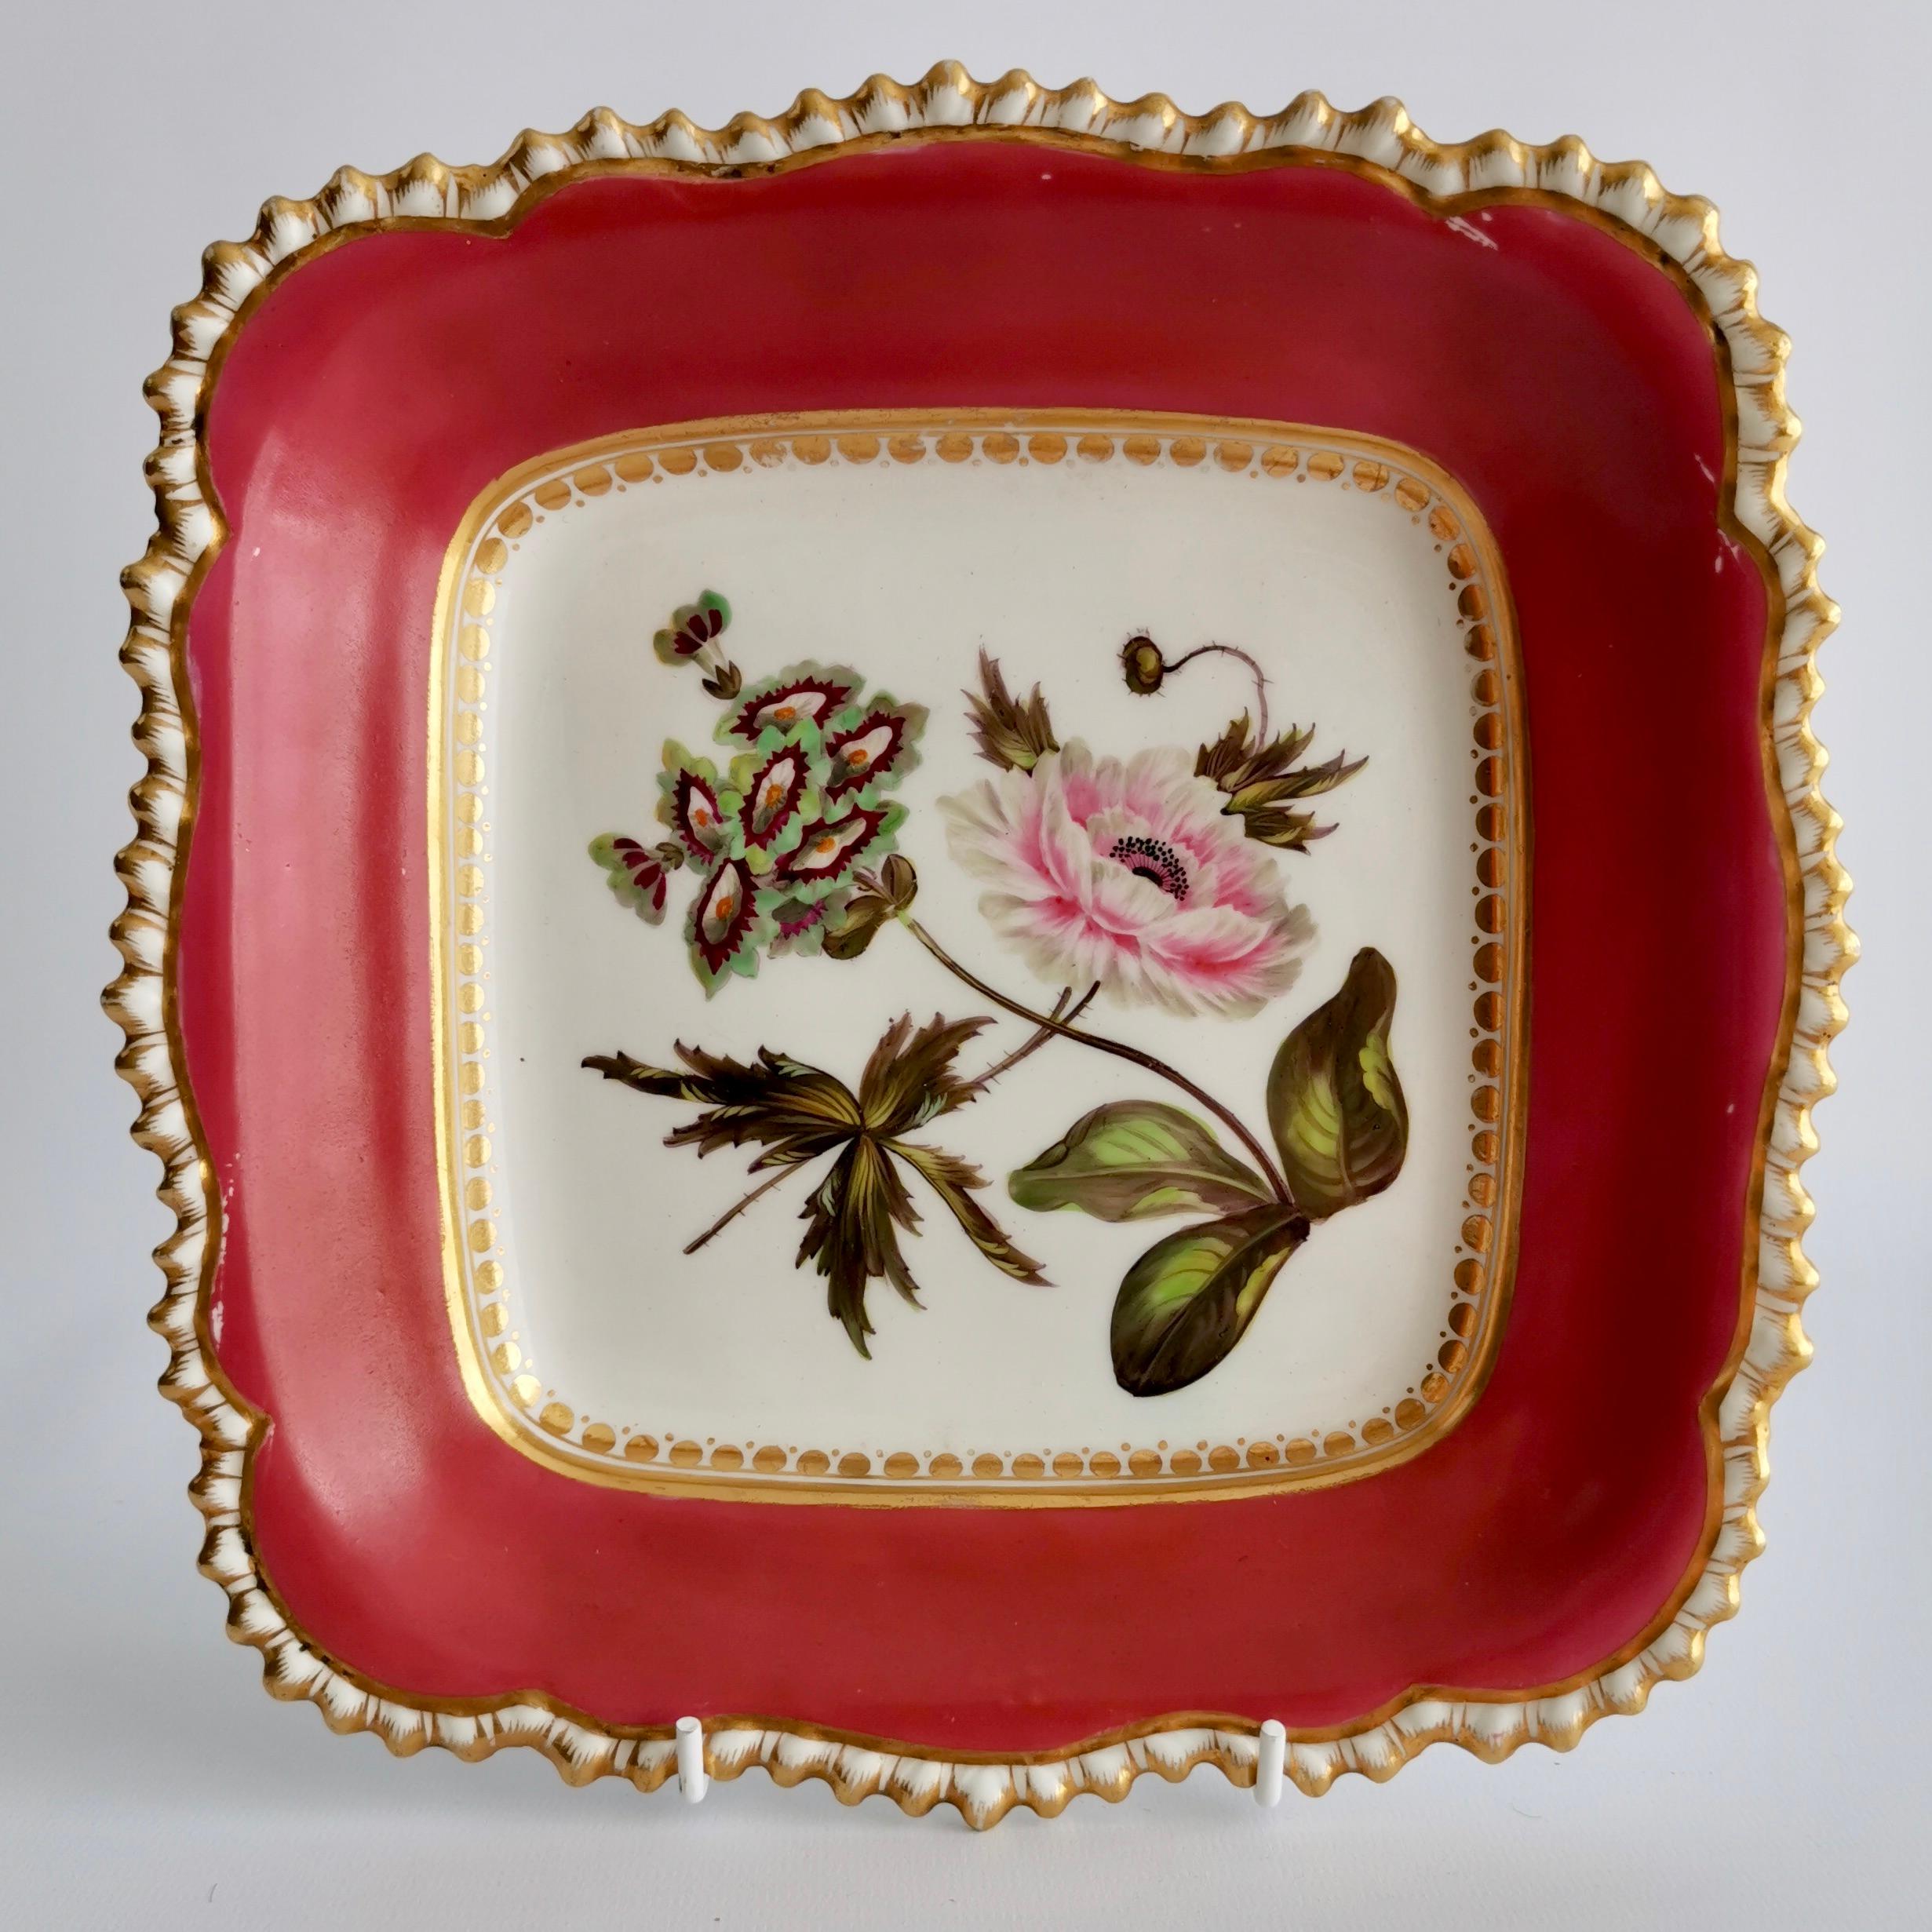 On offer is a part-dessert service made by Coalport between 1820 and 1825. The items have a deep maroon ground and stunning botanical paintings attributed to Cecil Jones. The service consists of ten plates, two one-handled dishes and one square